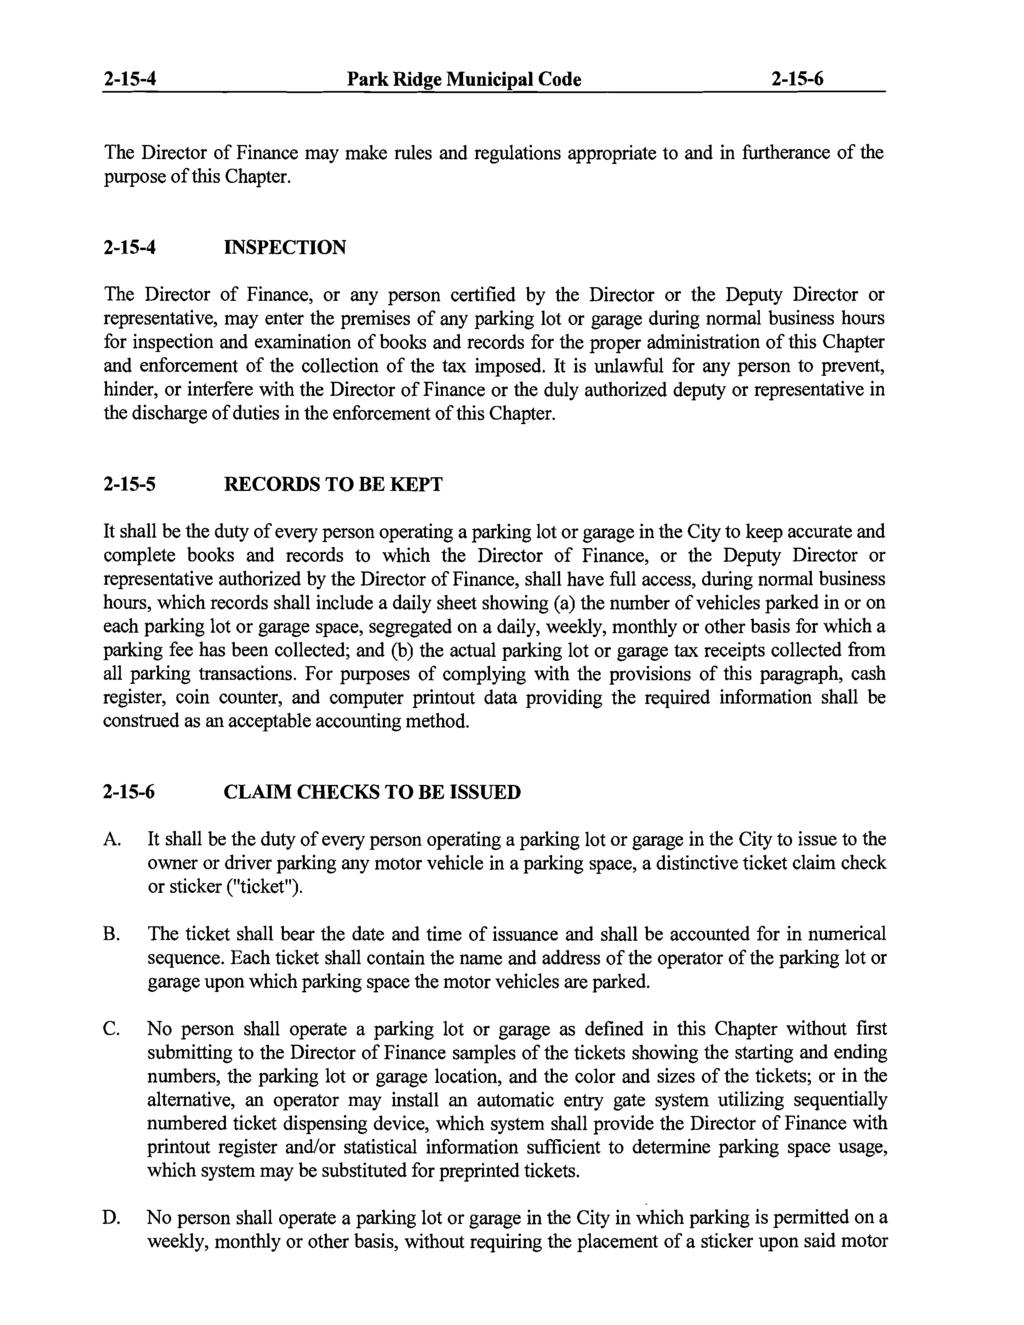 2-15-4 Park Ridge Municipal Code 2-15-6 The Director of Finance may make rules and regulations appropriate to and in furtherance of the purpose ofthis Chapter.